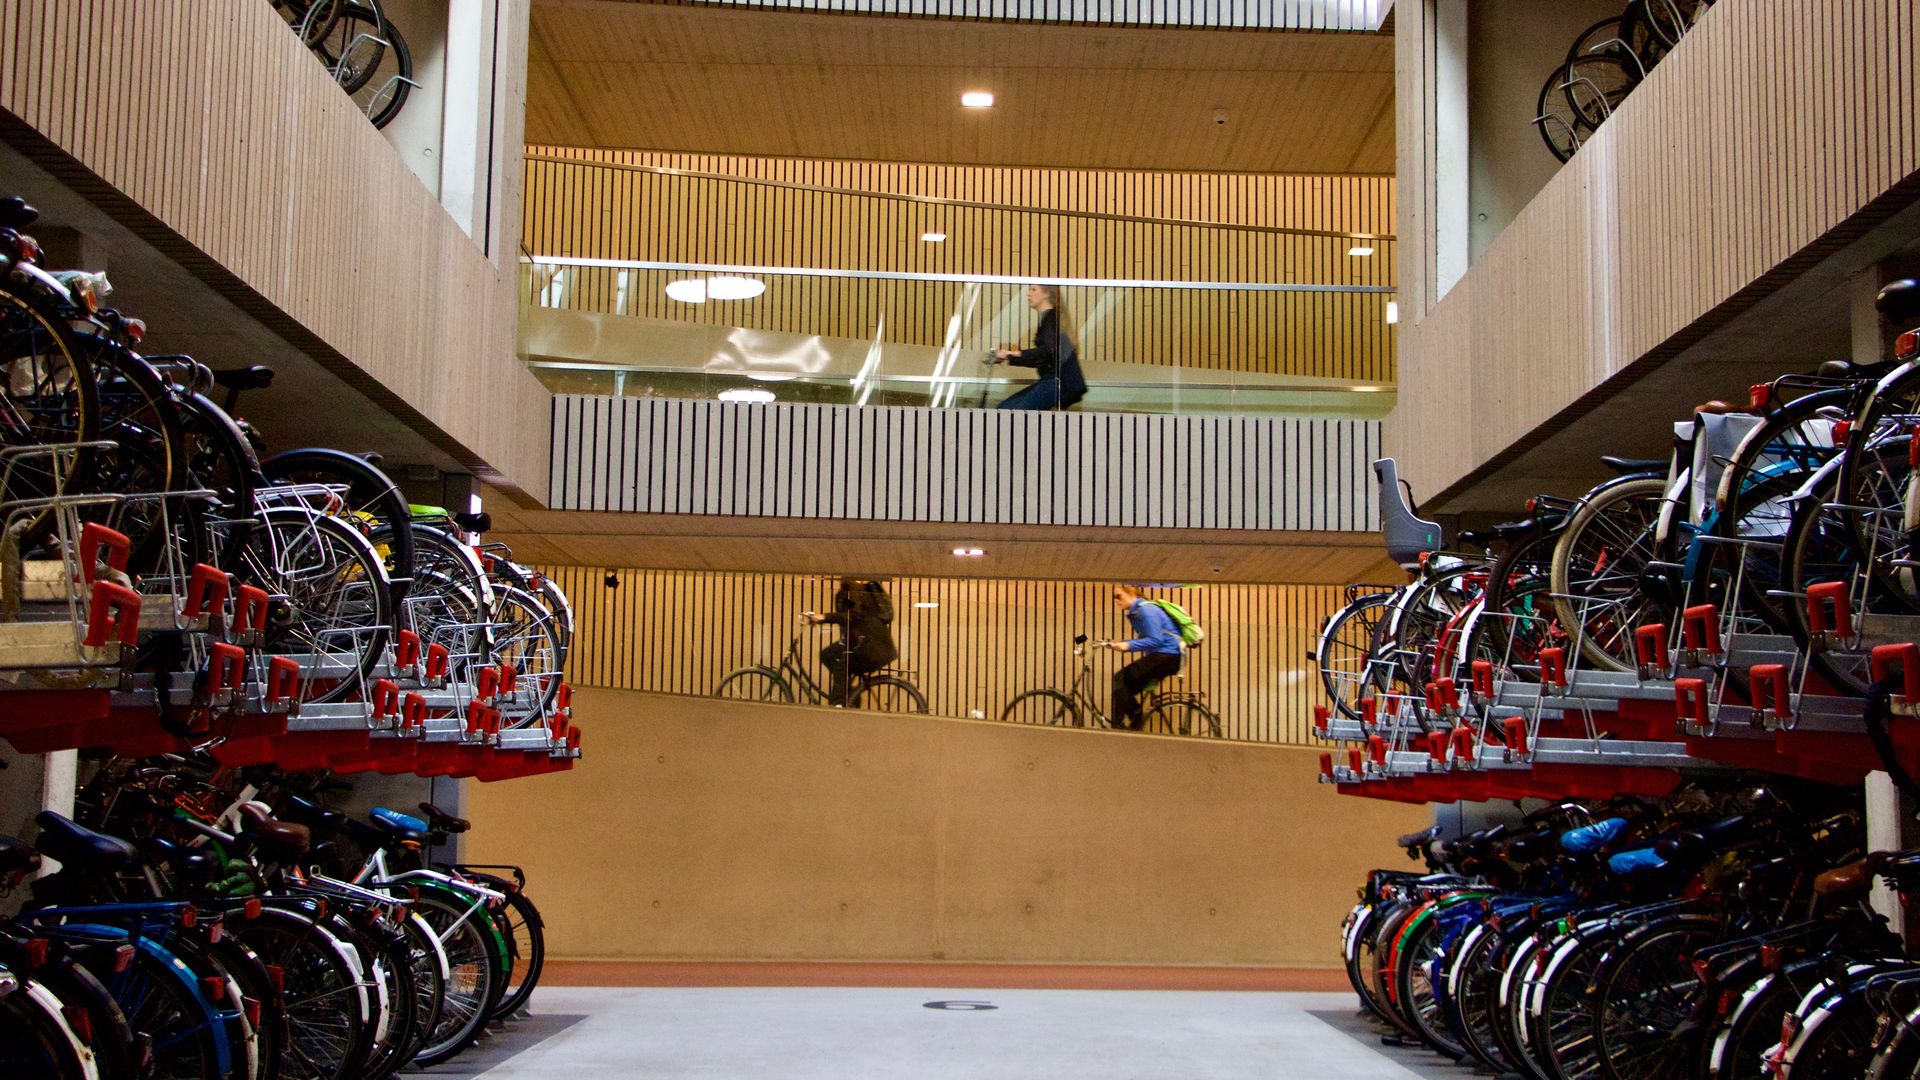 Image of the world's largest bicycle parking garage in Utrecht, Netherlands